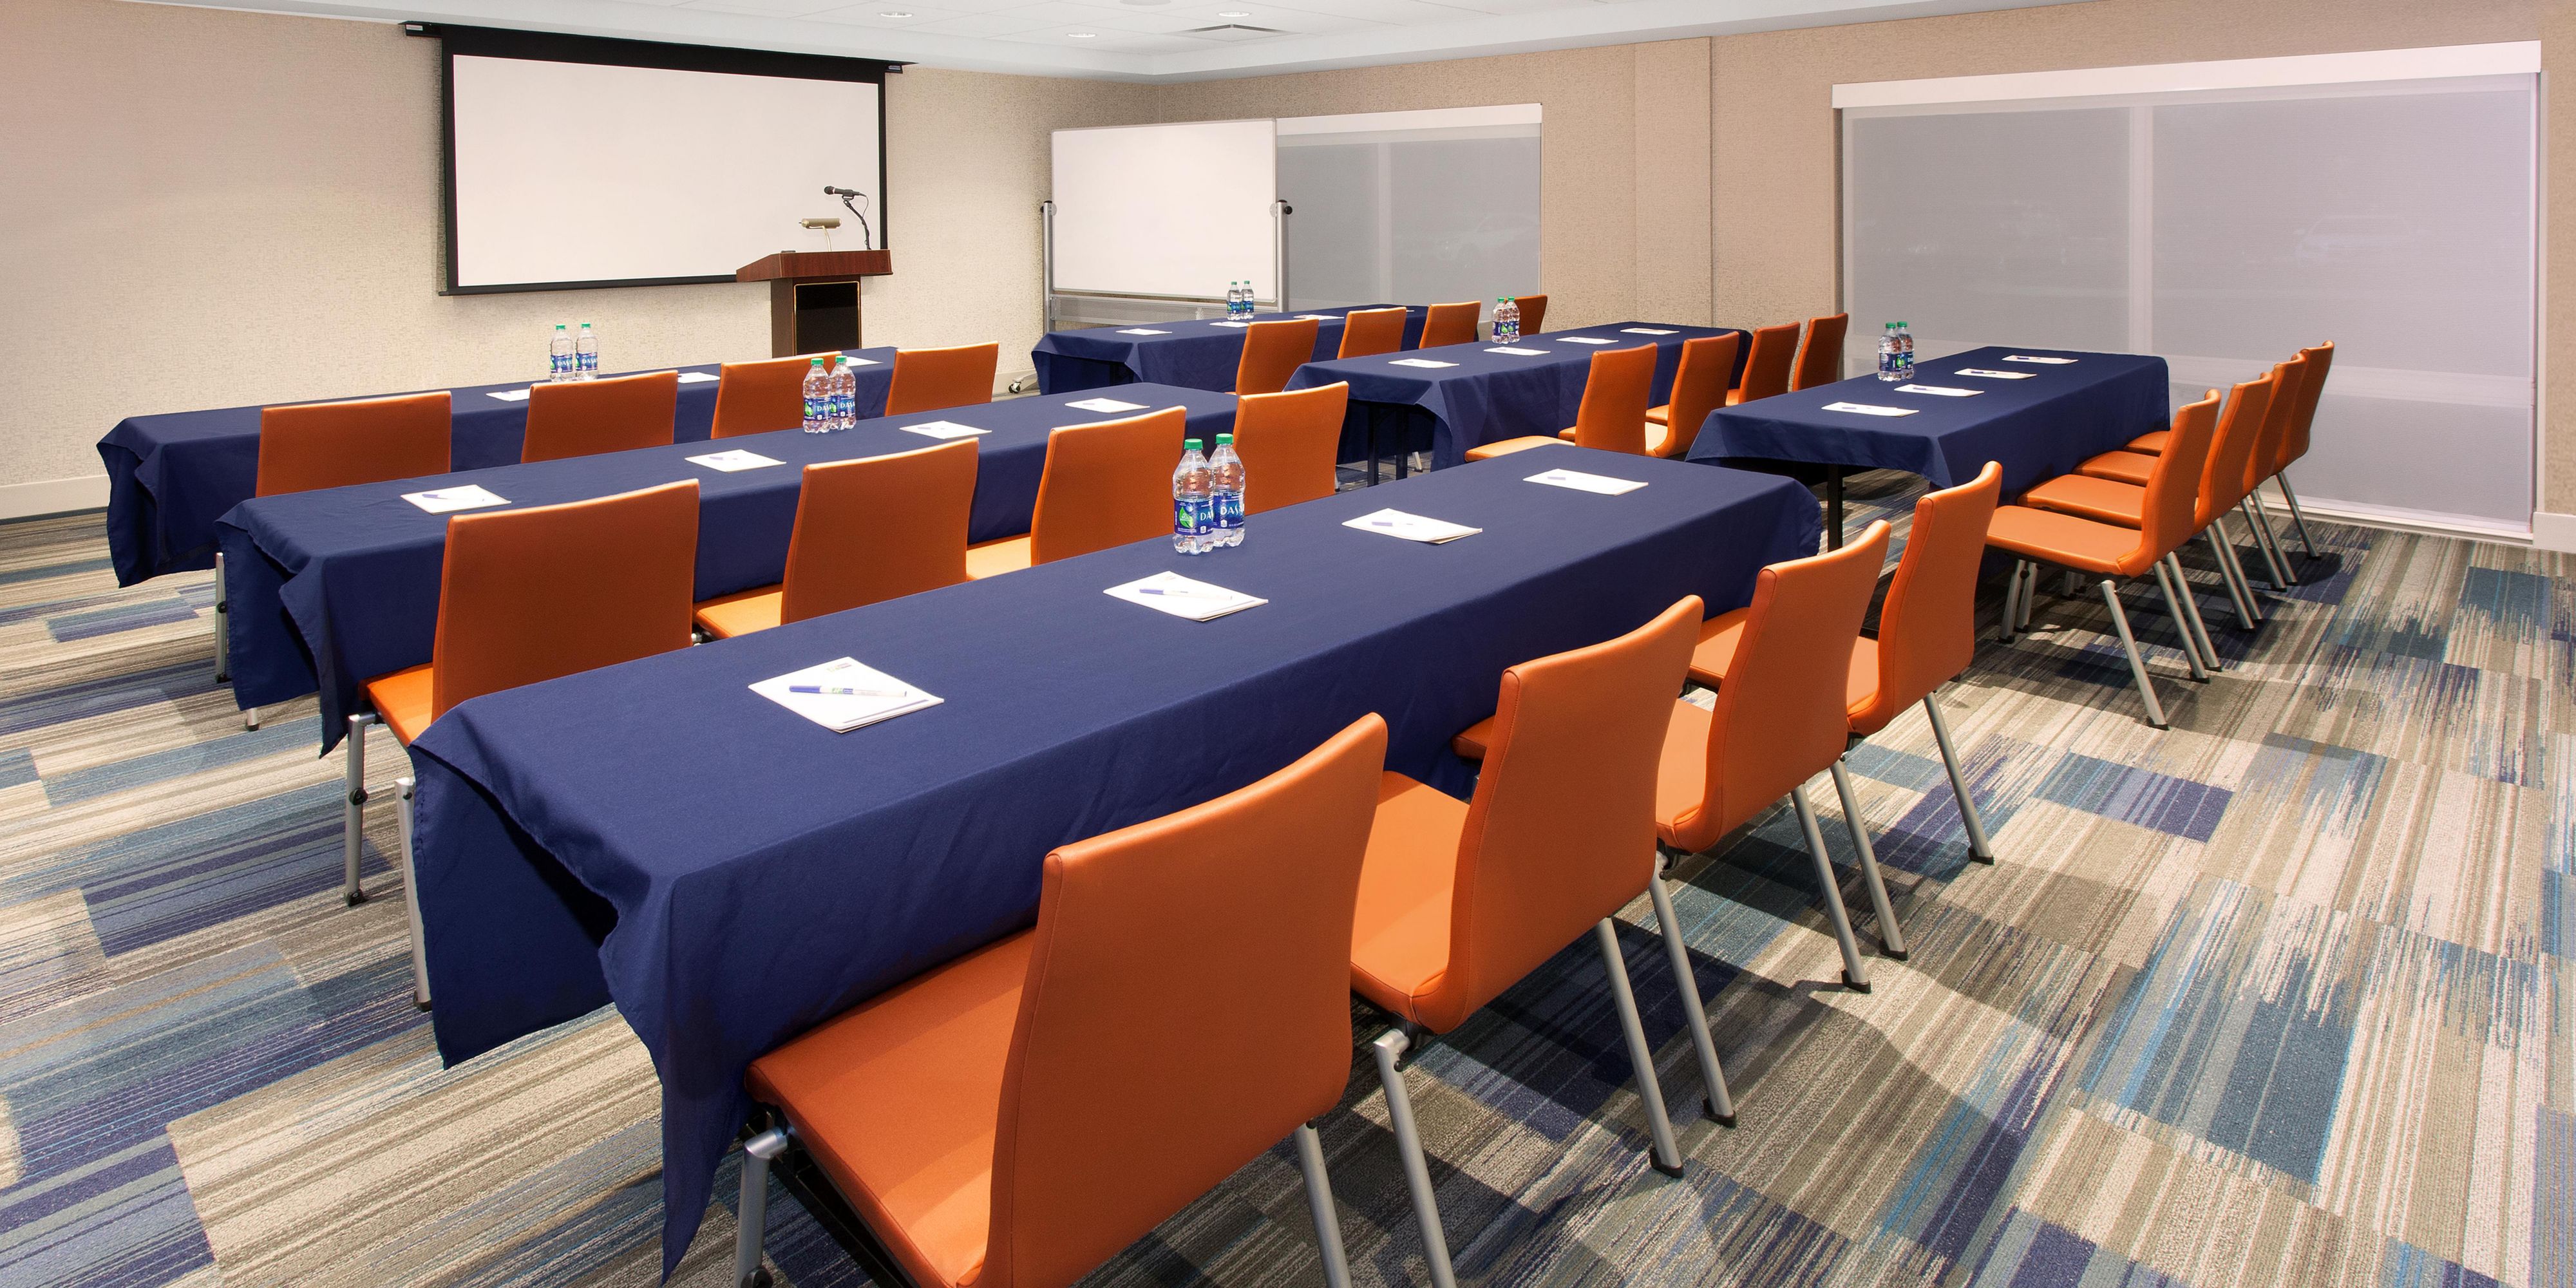 Think of us when planning your next meeting. Call our sales department for more information.